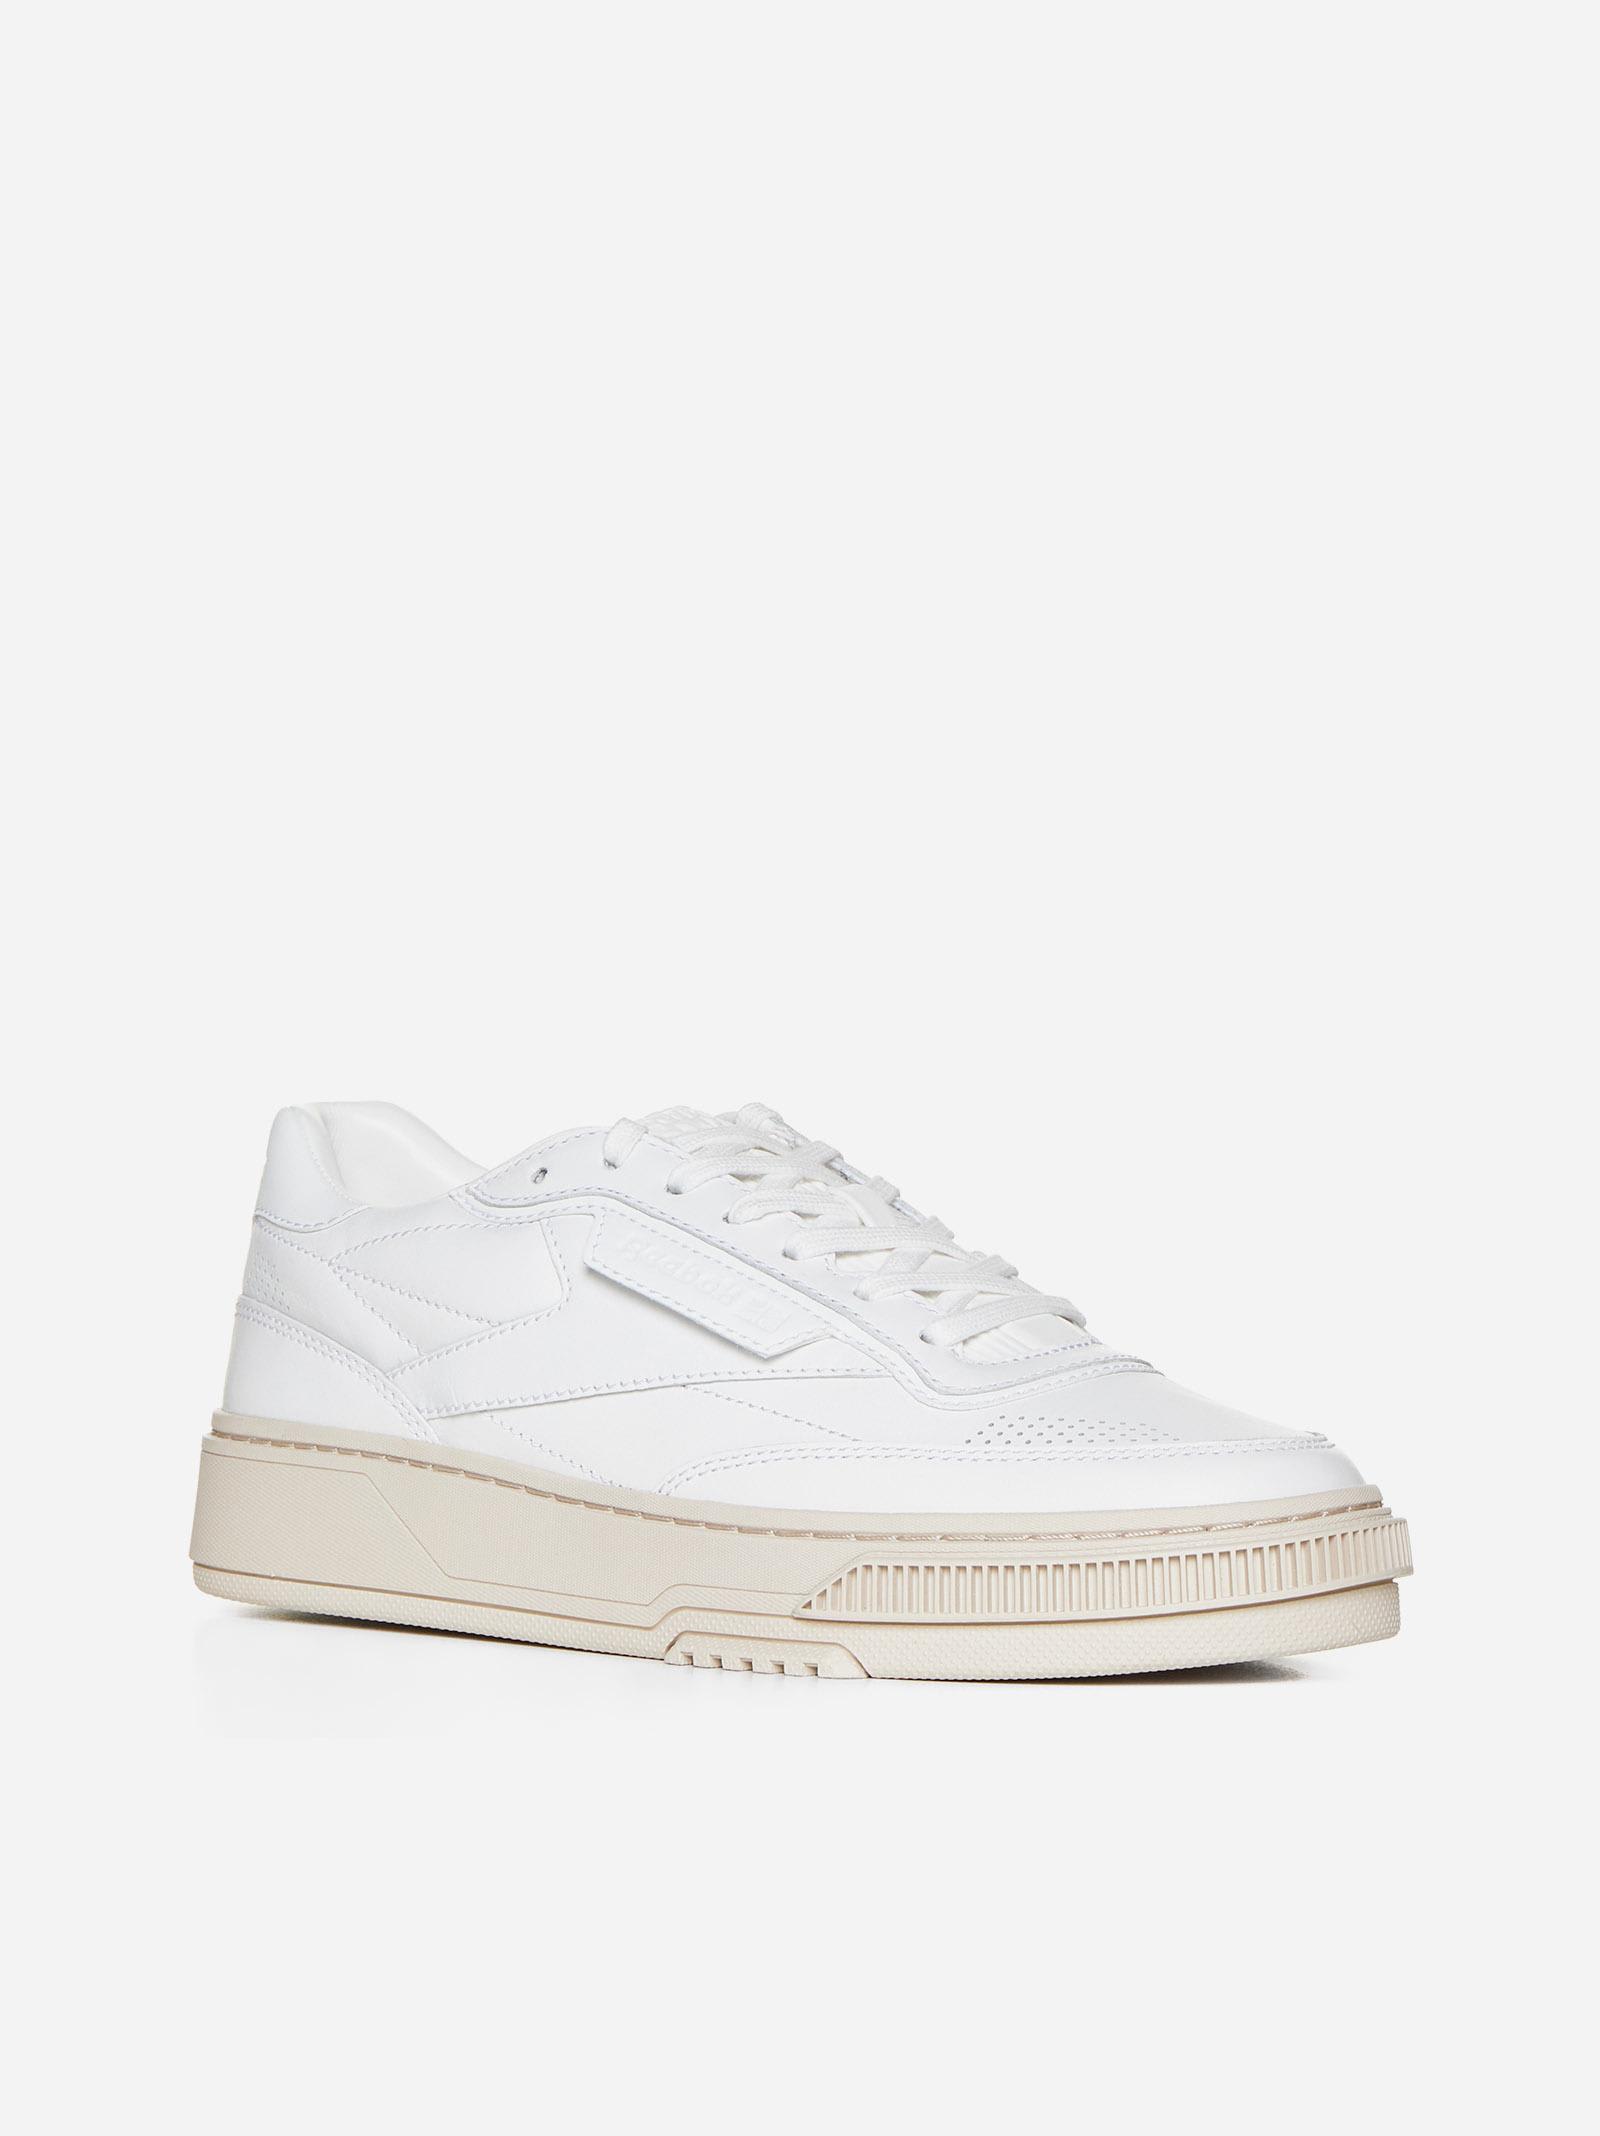 Shop Reebok Club C Ltd Leather Sneakers In White Lthe